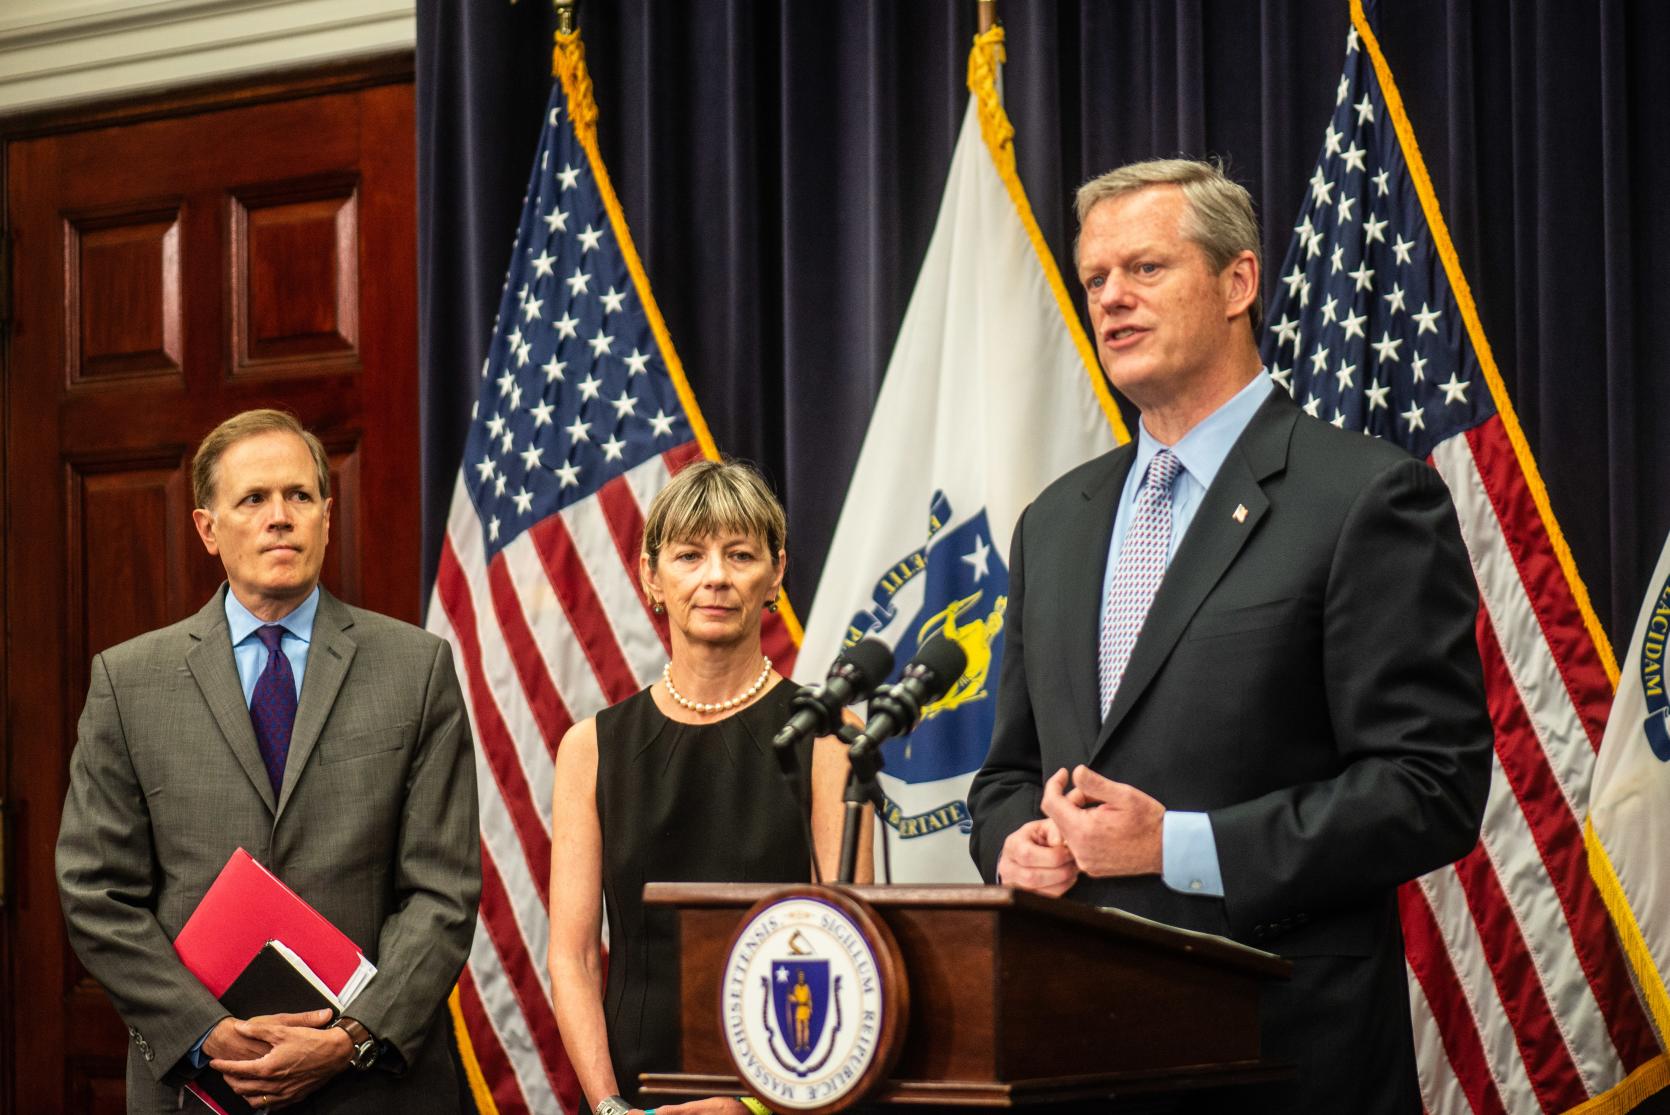 Governor Baker, Secretary Peyser, and Secretary Sudders speak at a press conference on school safety and education investments.